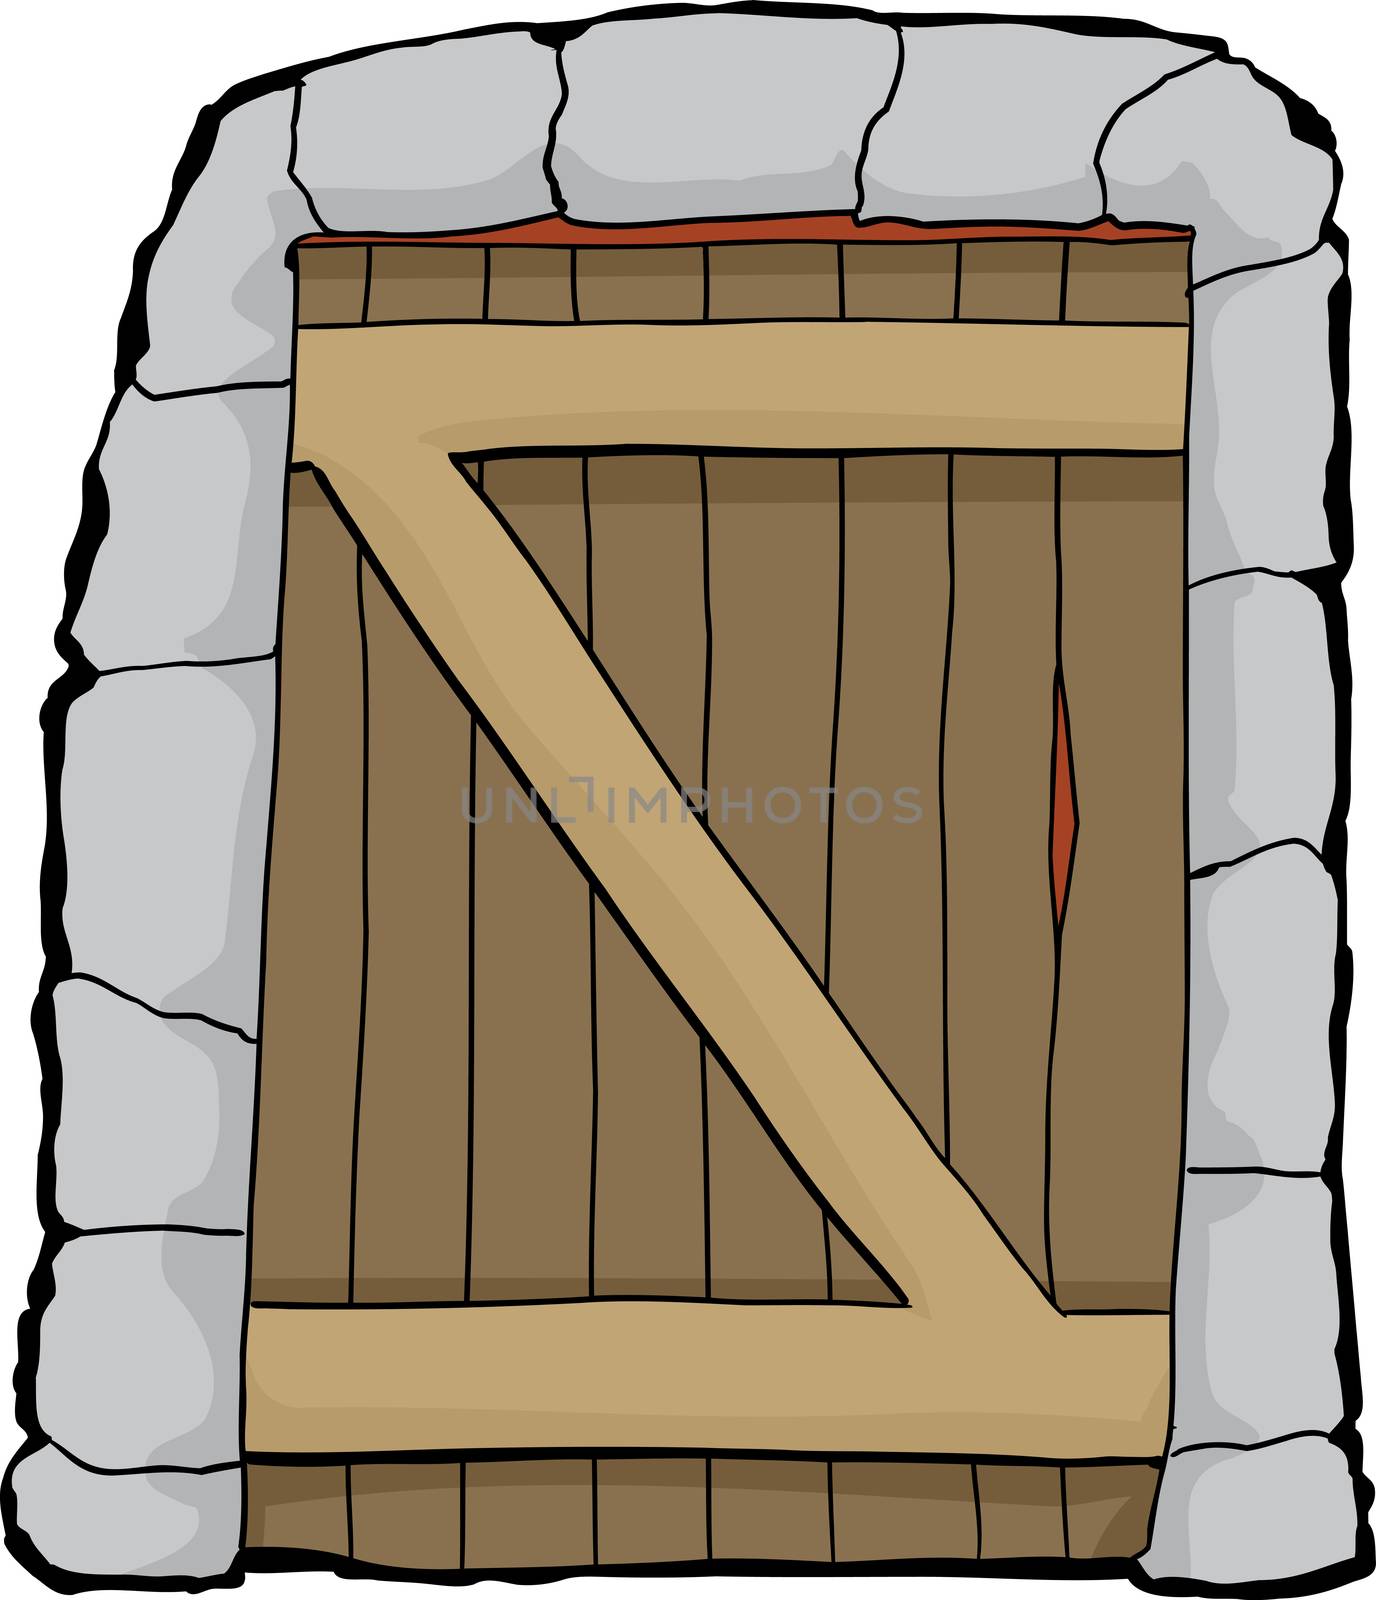 Dungeon doorway illustration over white by TheBlackRhino